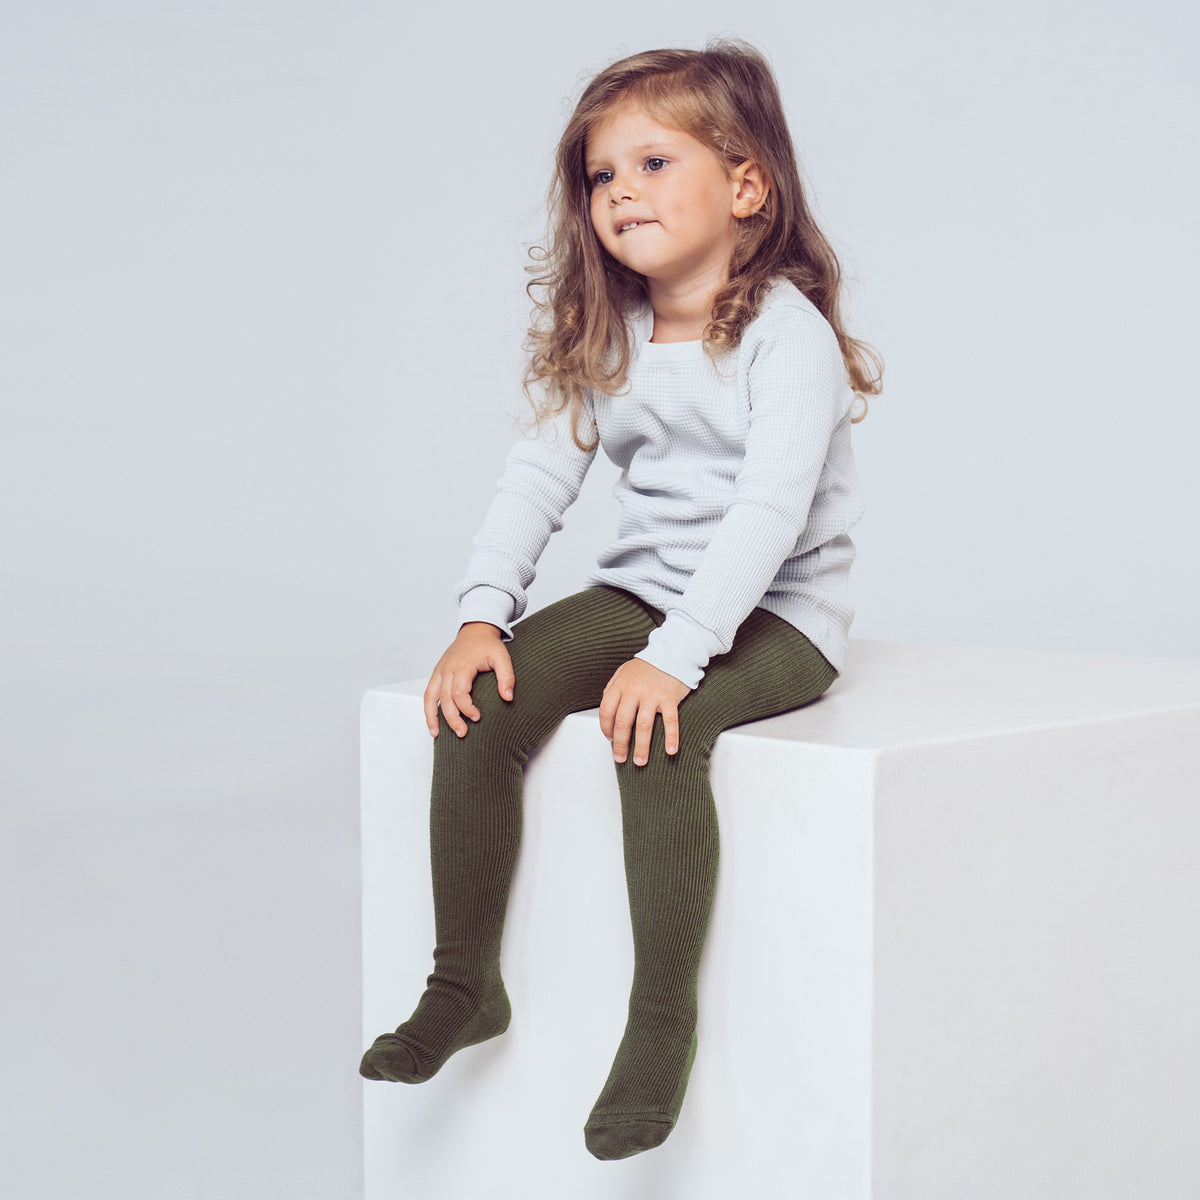 PEQNE Footed Children Tights in Forest Green